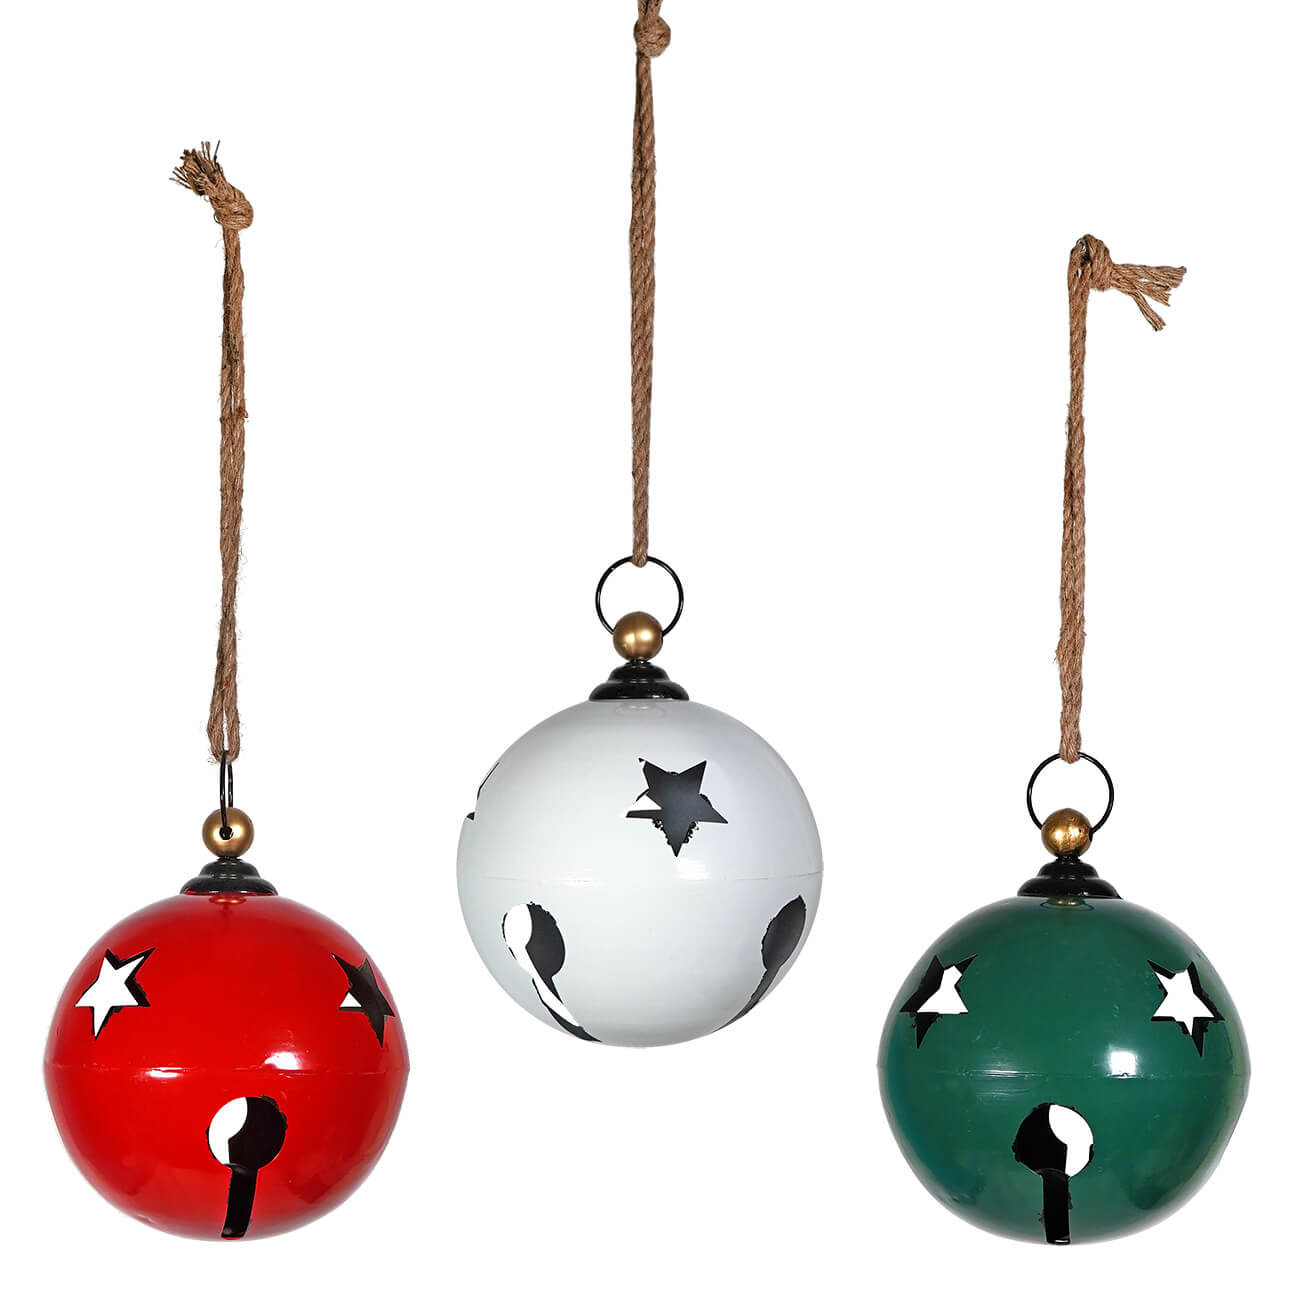 Jumbo Hanging Jingle Bell Ornaments Set/3 by Gerson Companies – Traditions